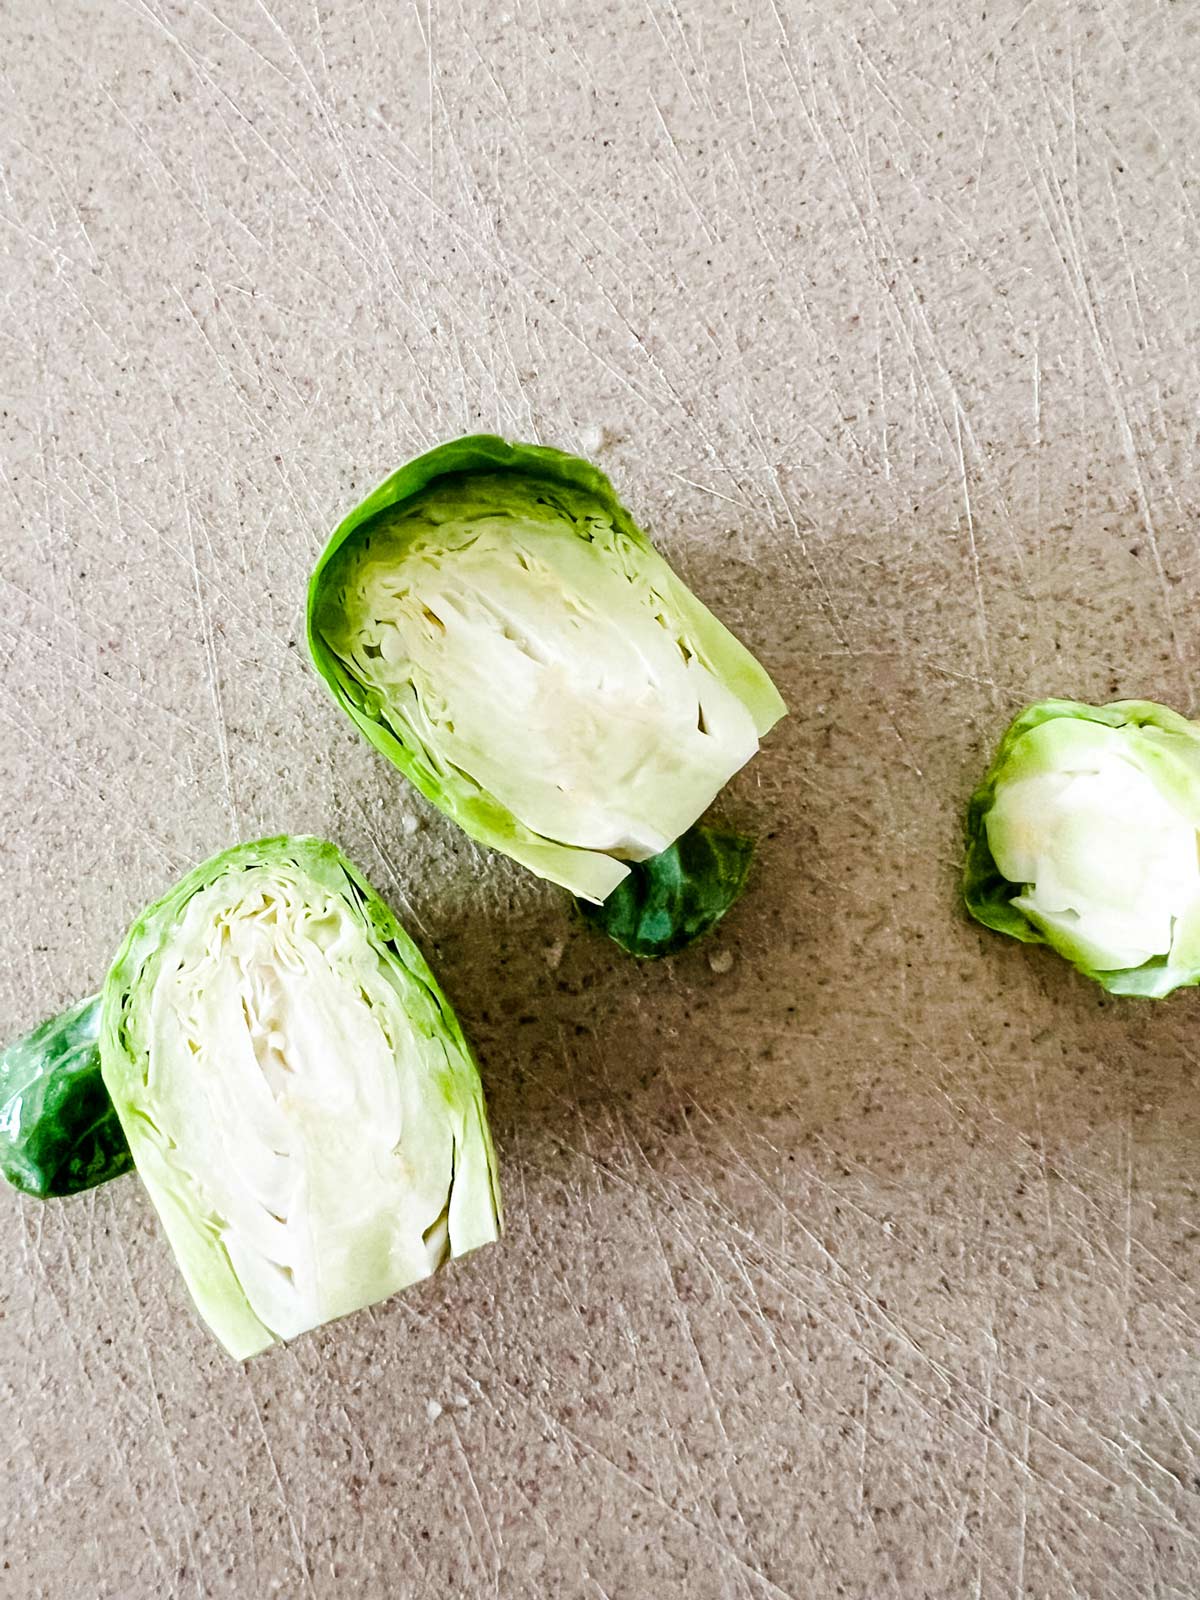 A Brussels sprout being trimmed.